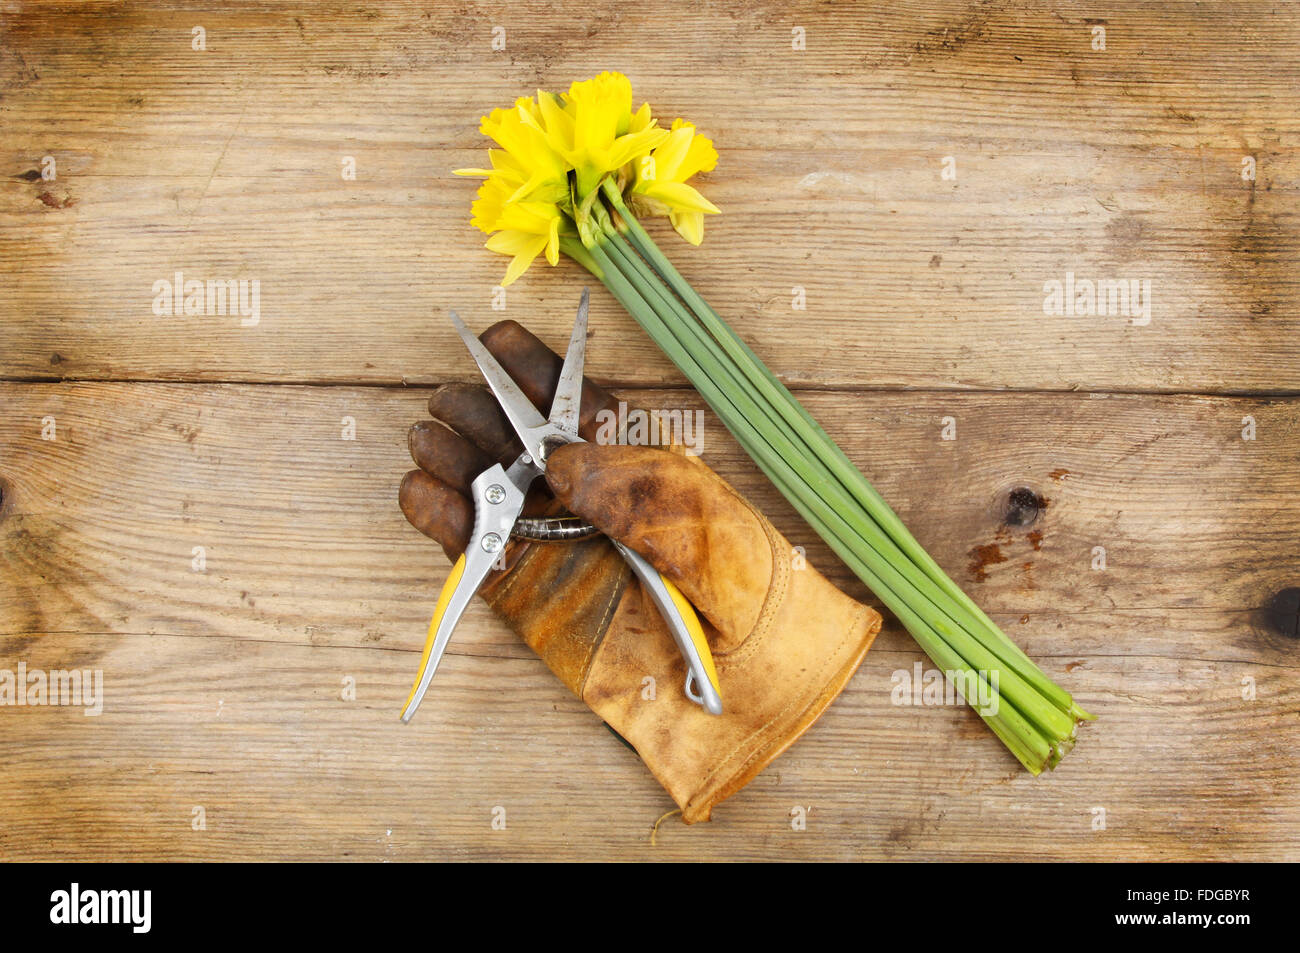 Freshly cut daffodil flowers with a gardening glove and secateurs on a wooden board Stock Photo